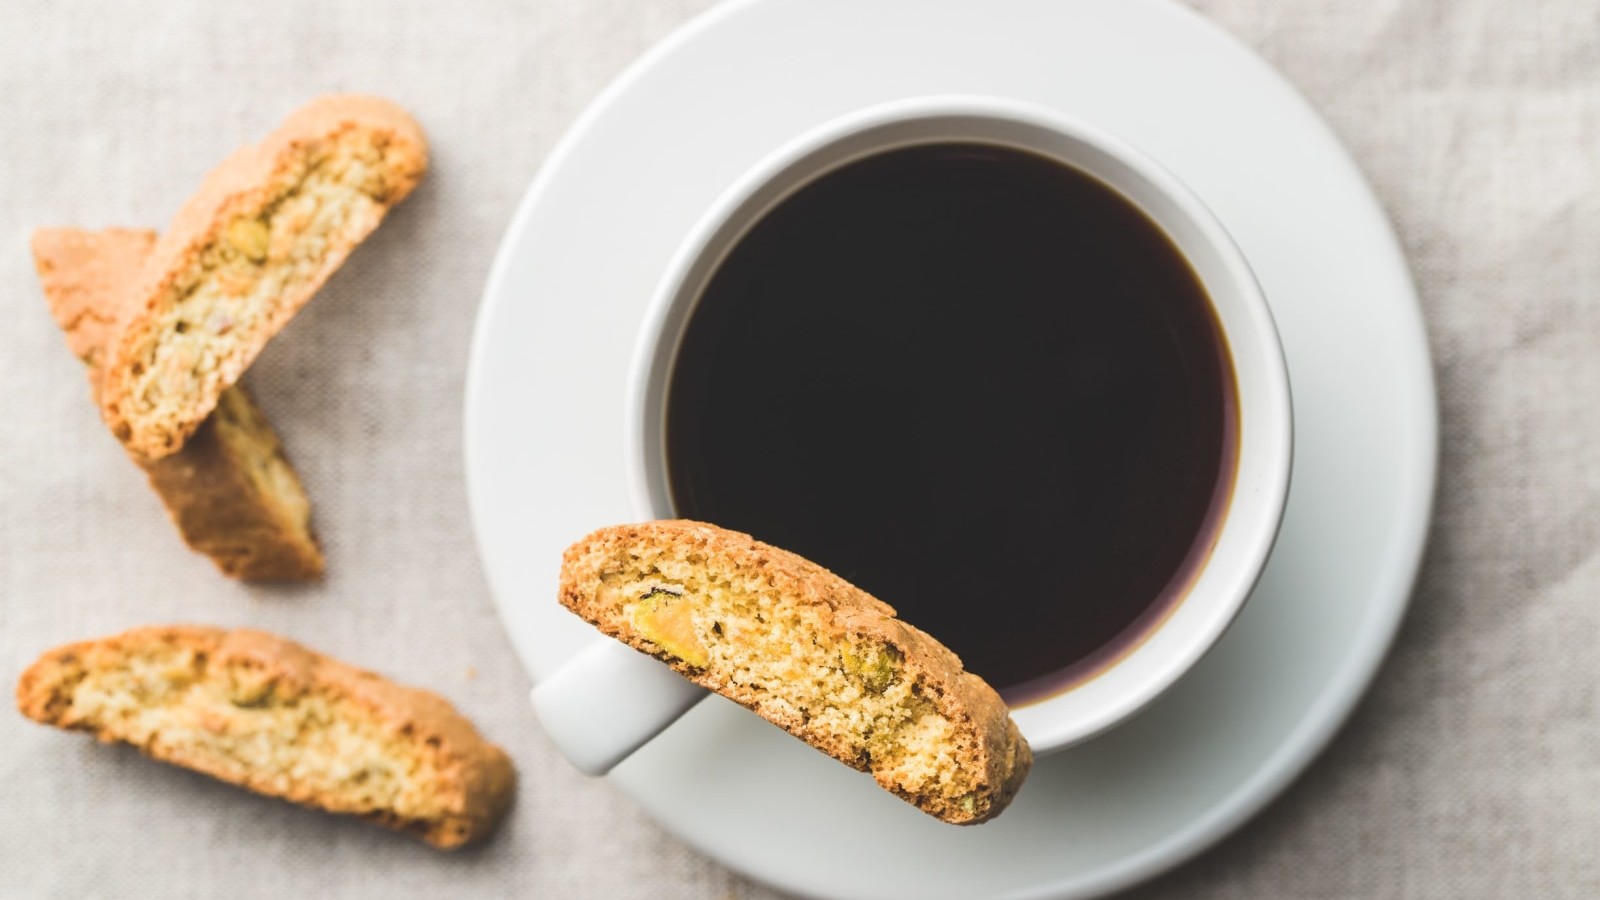 Image of Basic Sicilian Biscotti with Anise